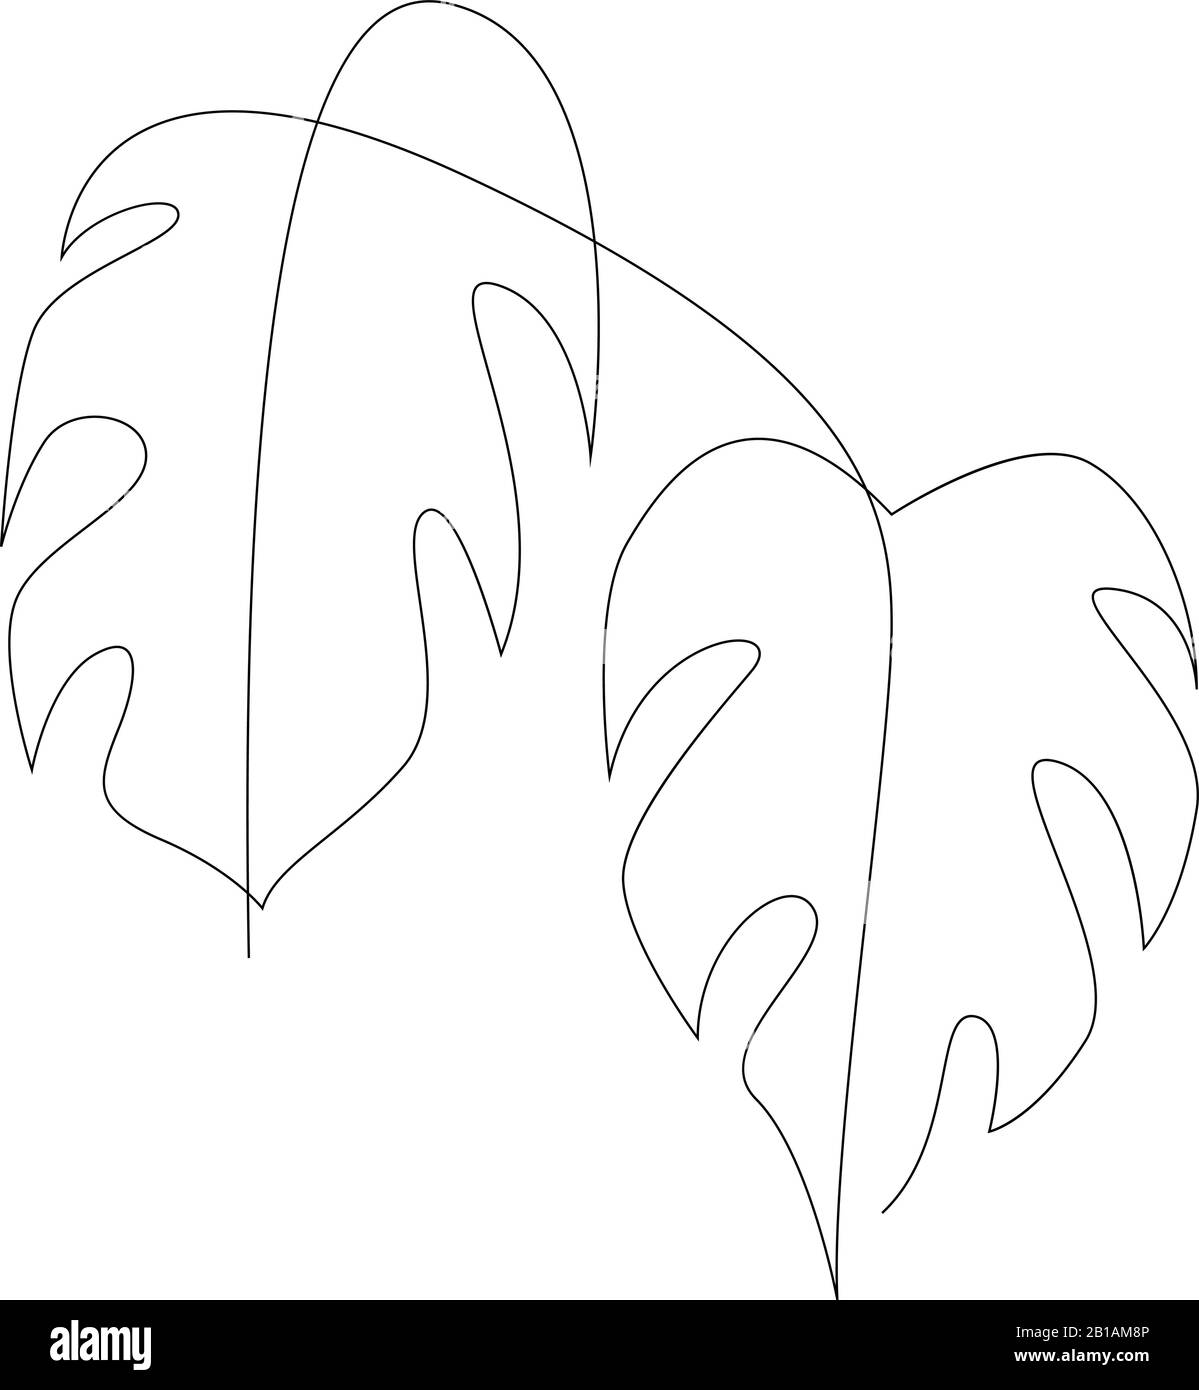 Abstract One Line Drawing Of A Tropical Leaf Minimal Art Plant Isolated On  A White Background Modern Black Illustration Romantic Drawing Of A  Continuous Line For Print Banner Postcard Holiday Ideas Vector